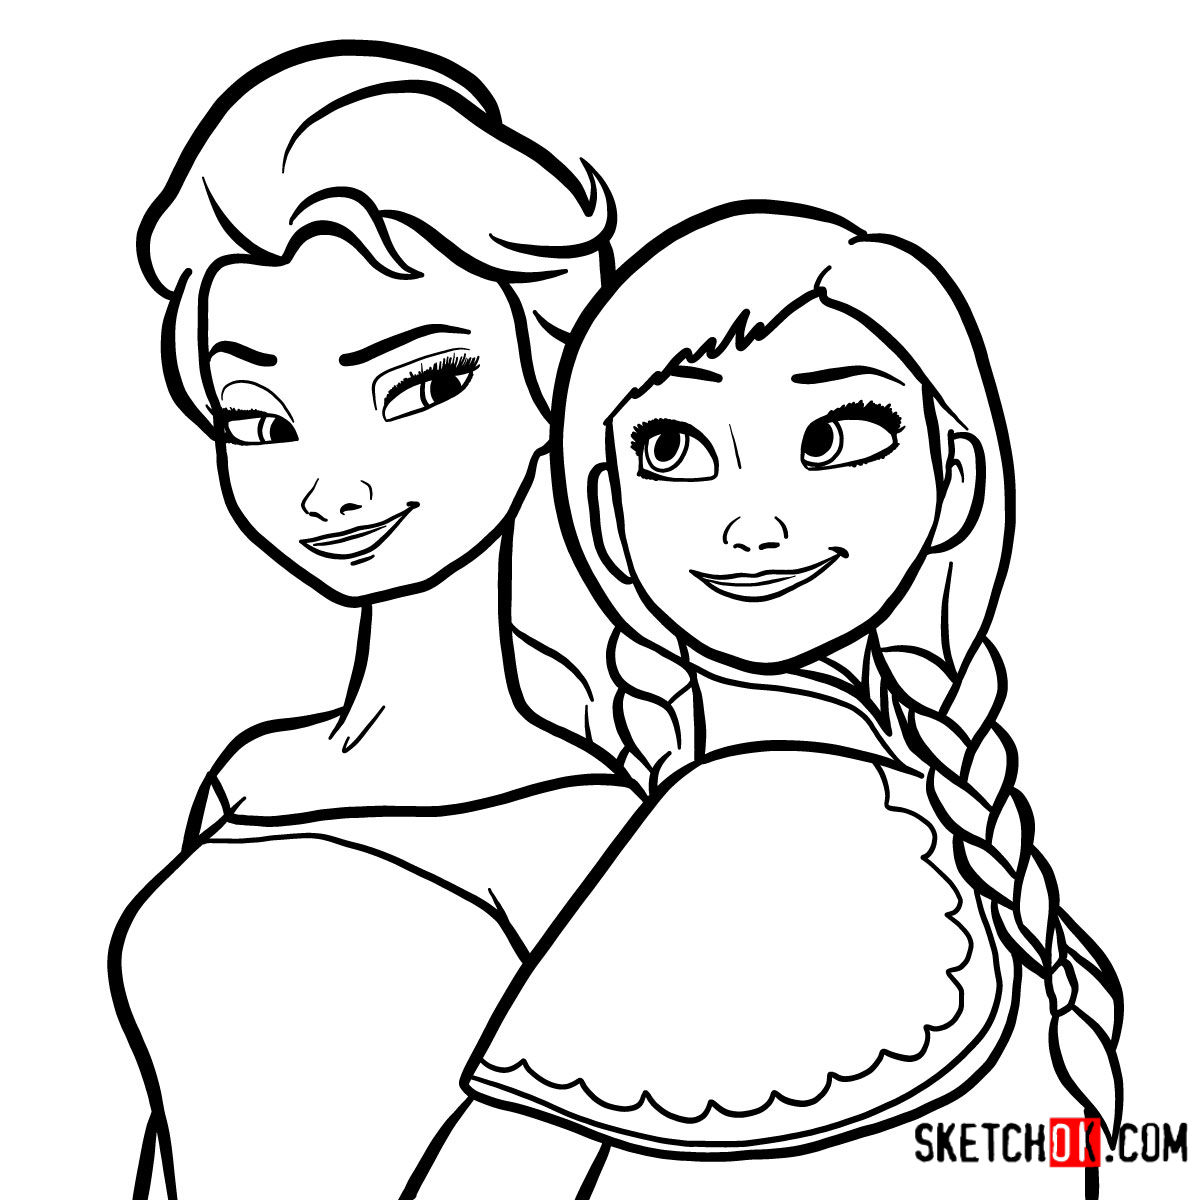 How to draw Elsa and Anna together | Frozen - Sketchok easy drawing guides